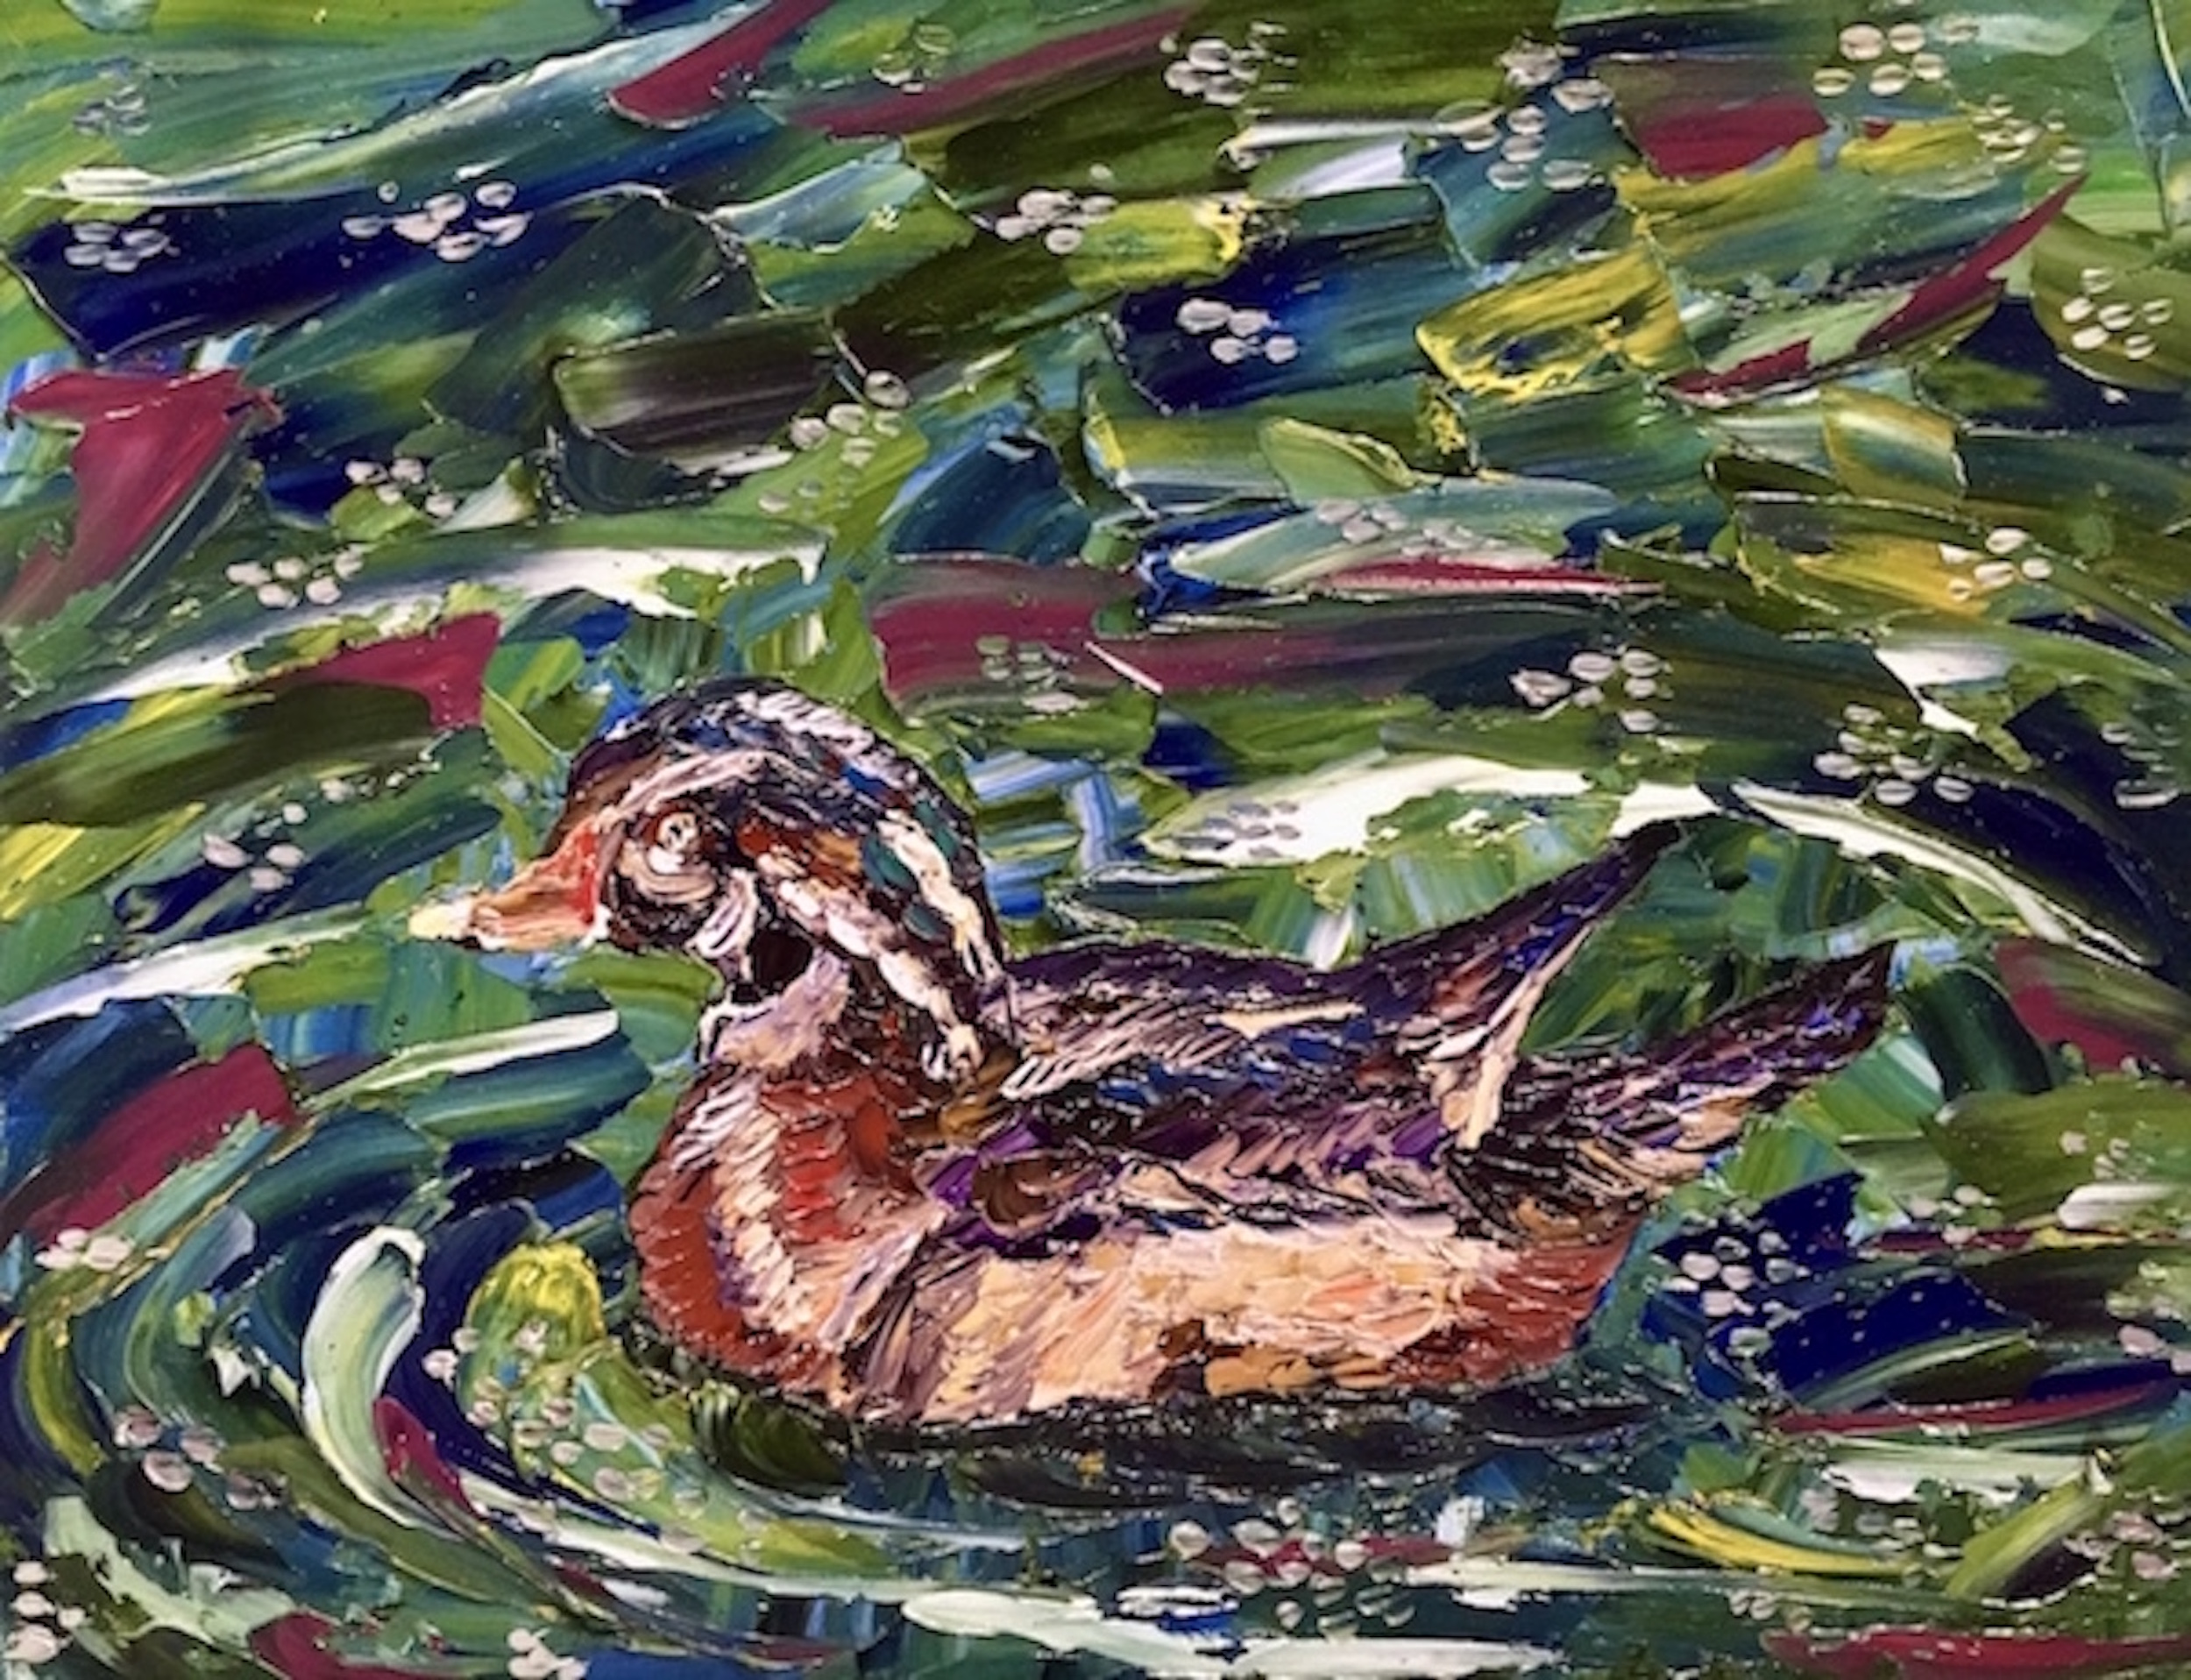 Paddle Furiously, Oil on Pastelboard by Kerstin Glaess